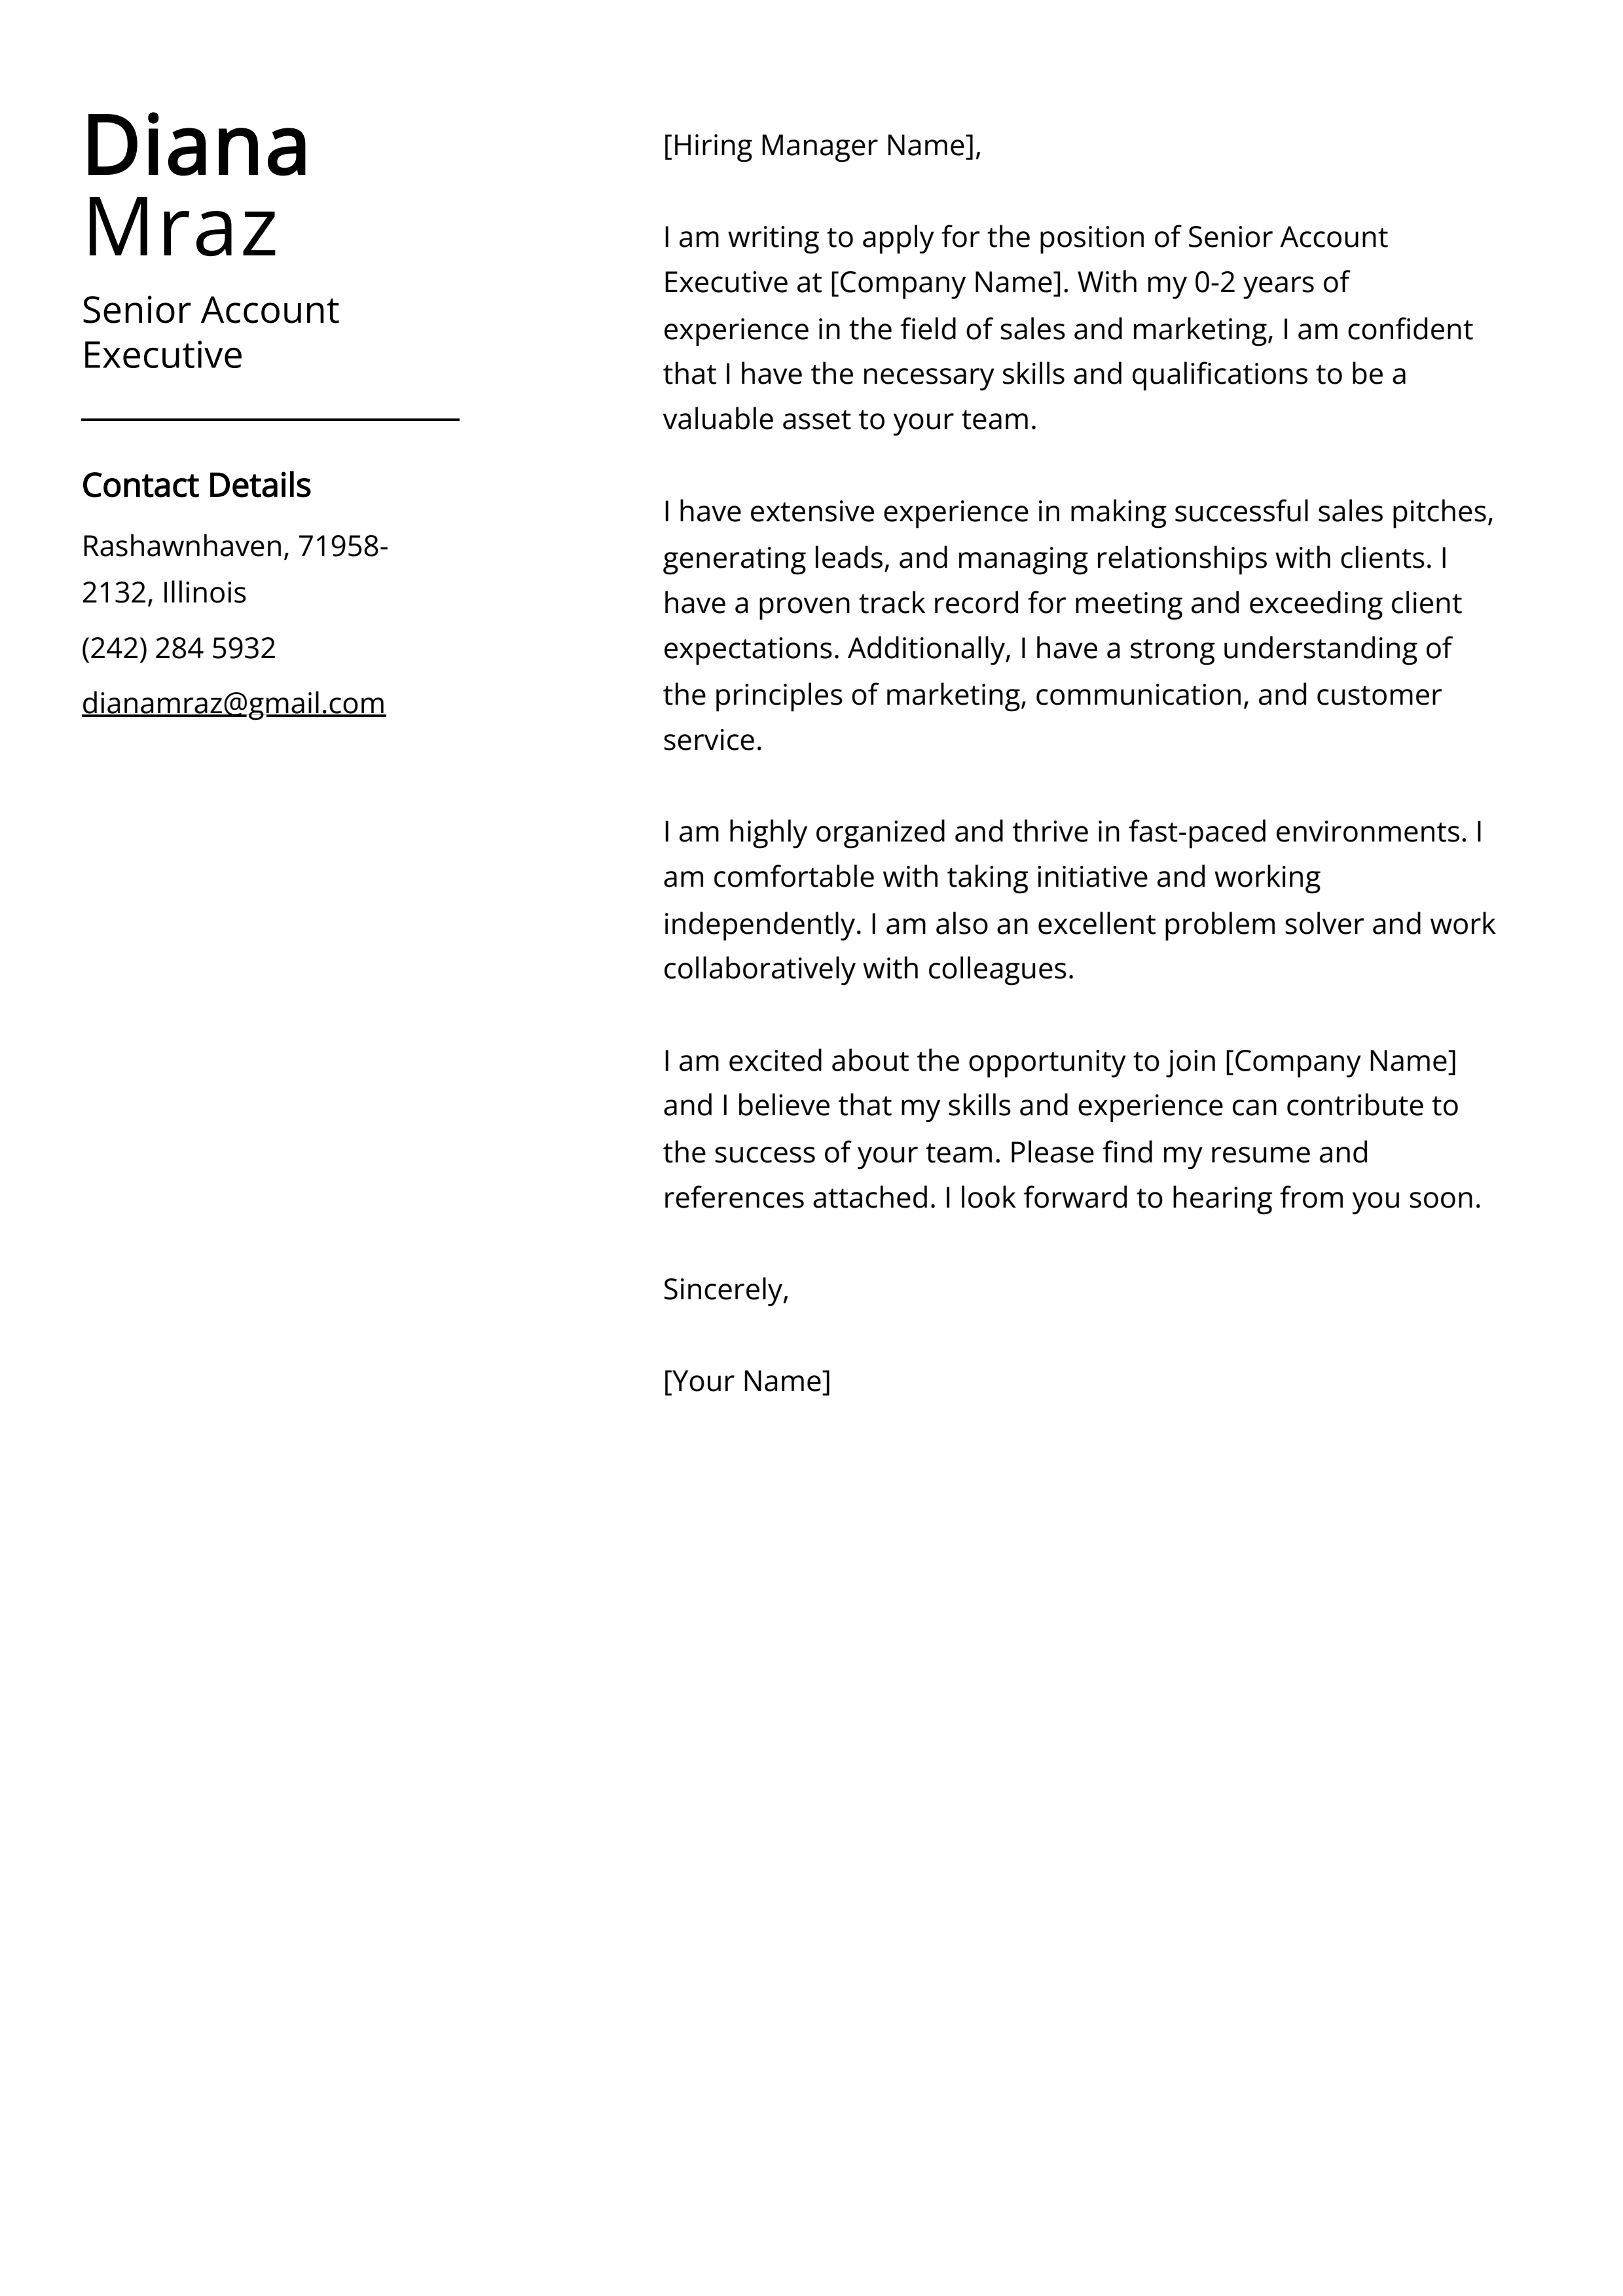 Senior Account Executive Cover Letter Example